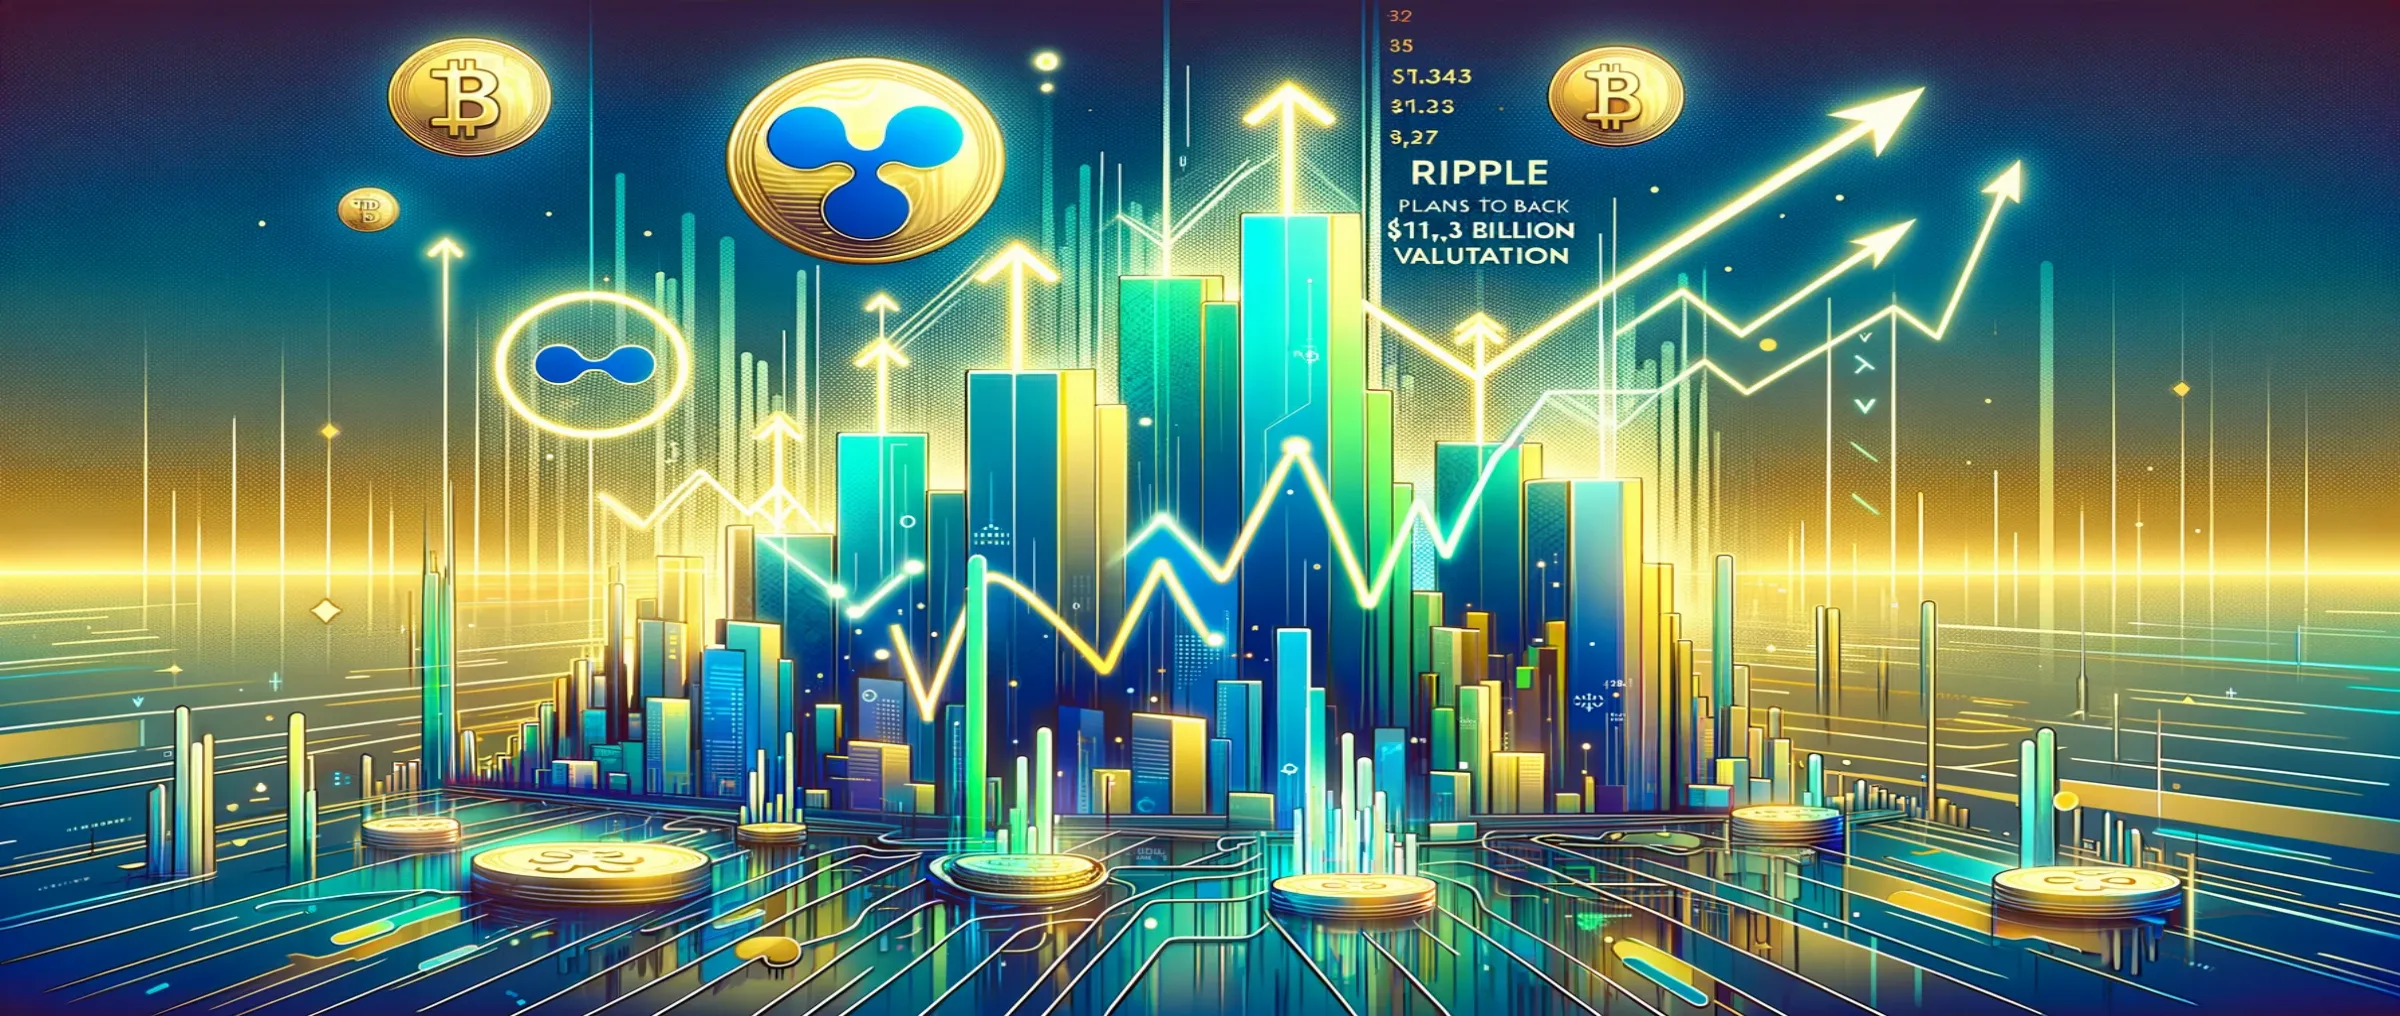 Ripple plans to buy back its shares at a valuation of $11.3 billion